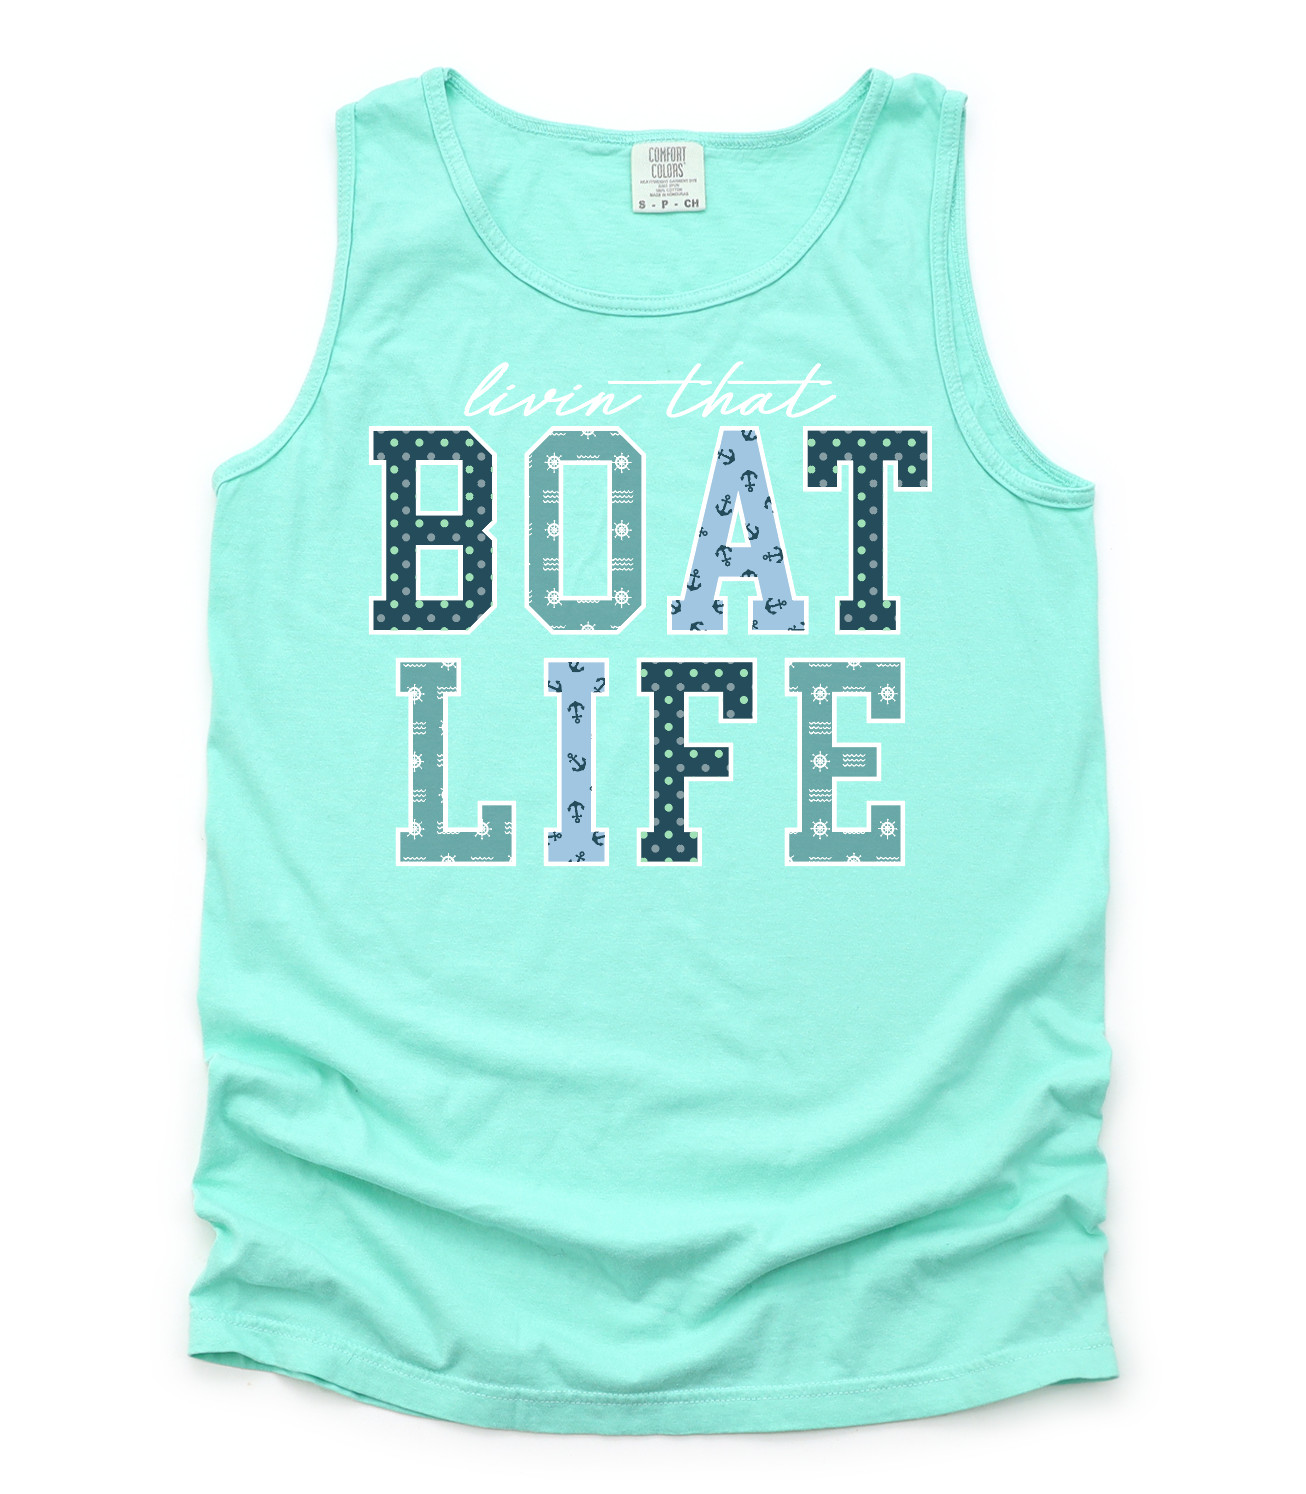 Livin That Boat Life preorder